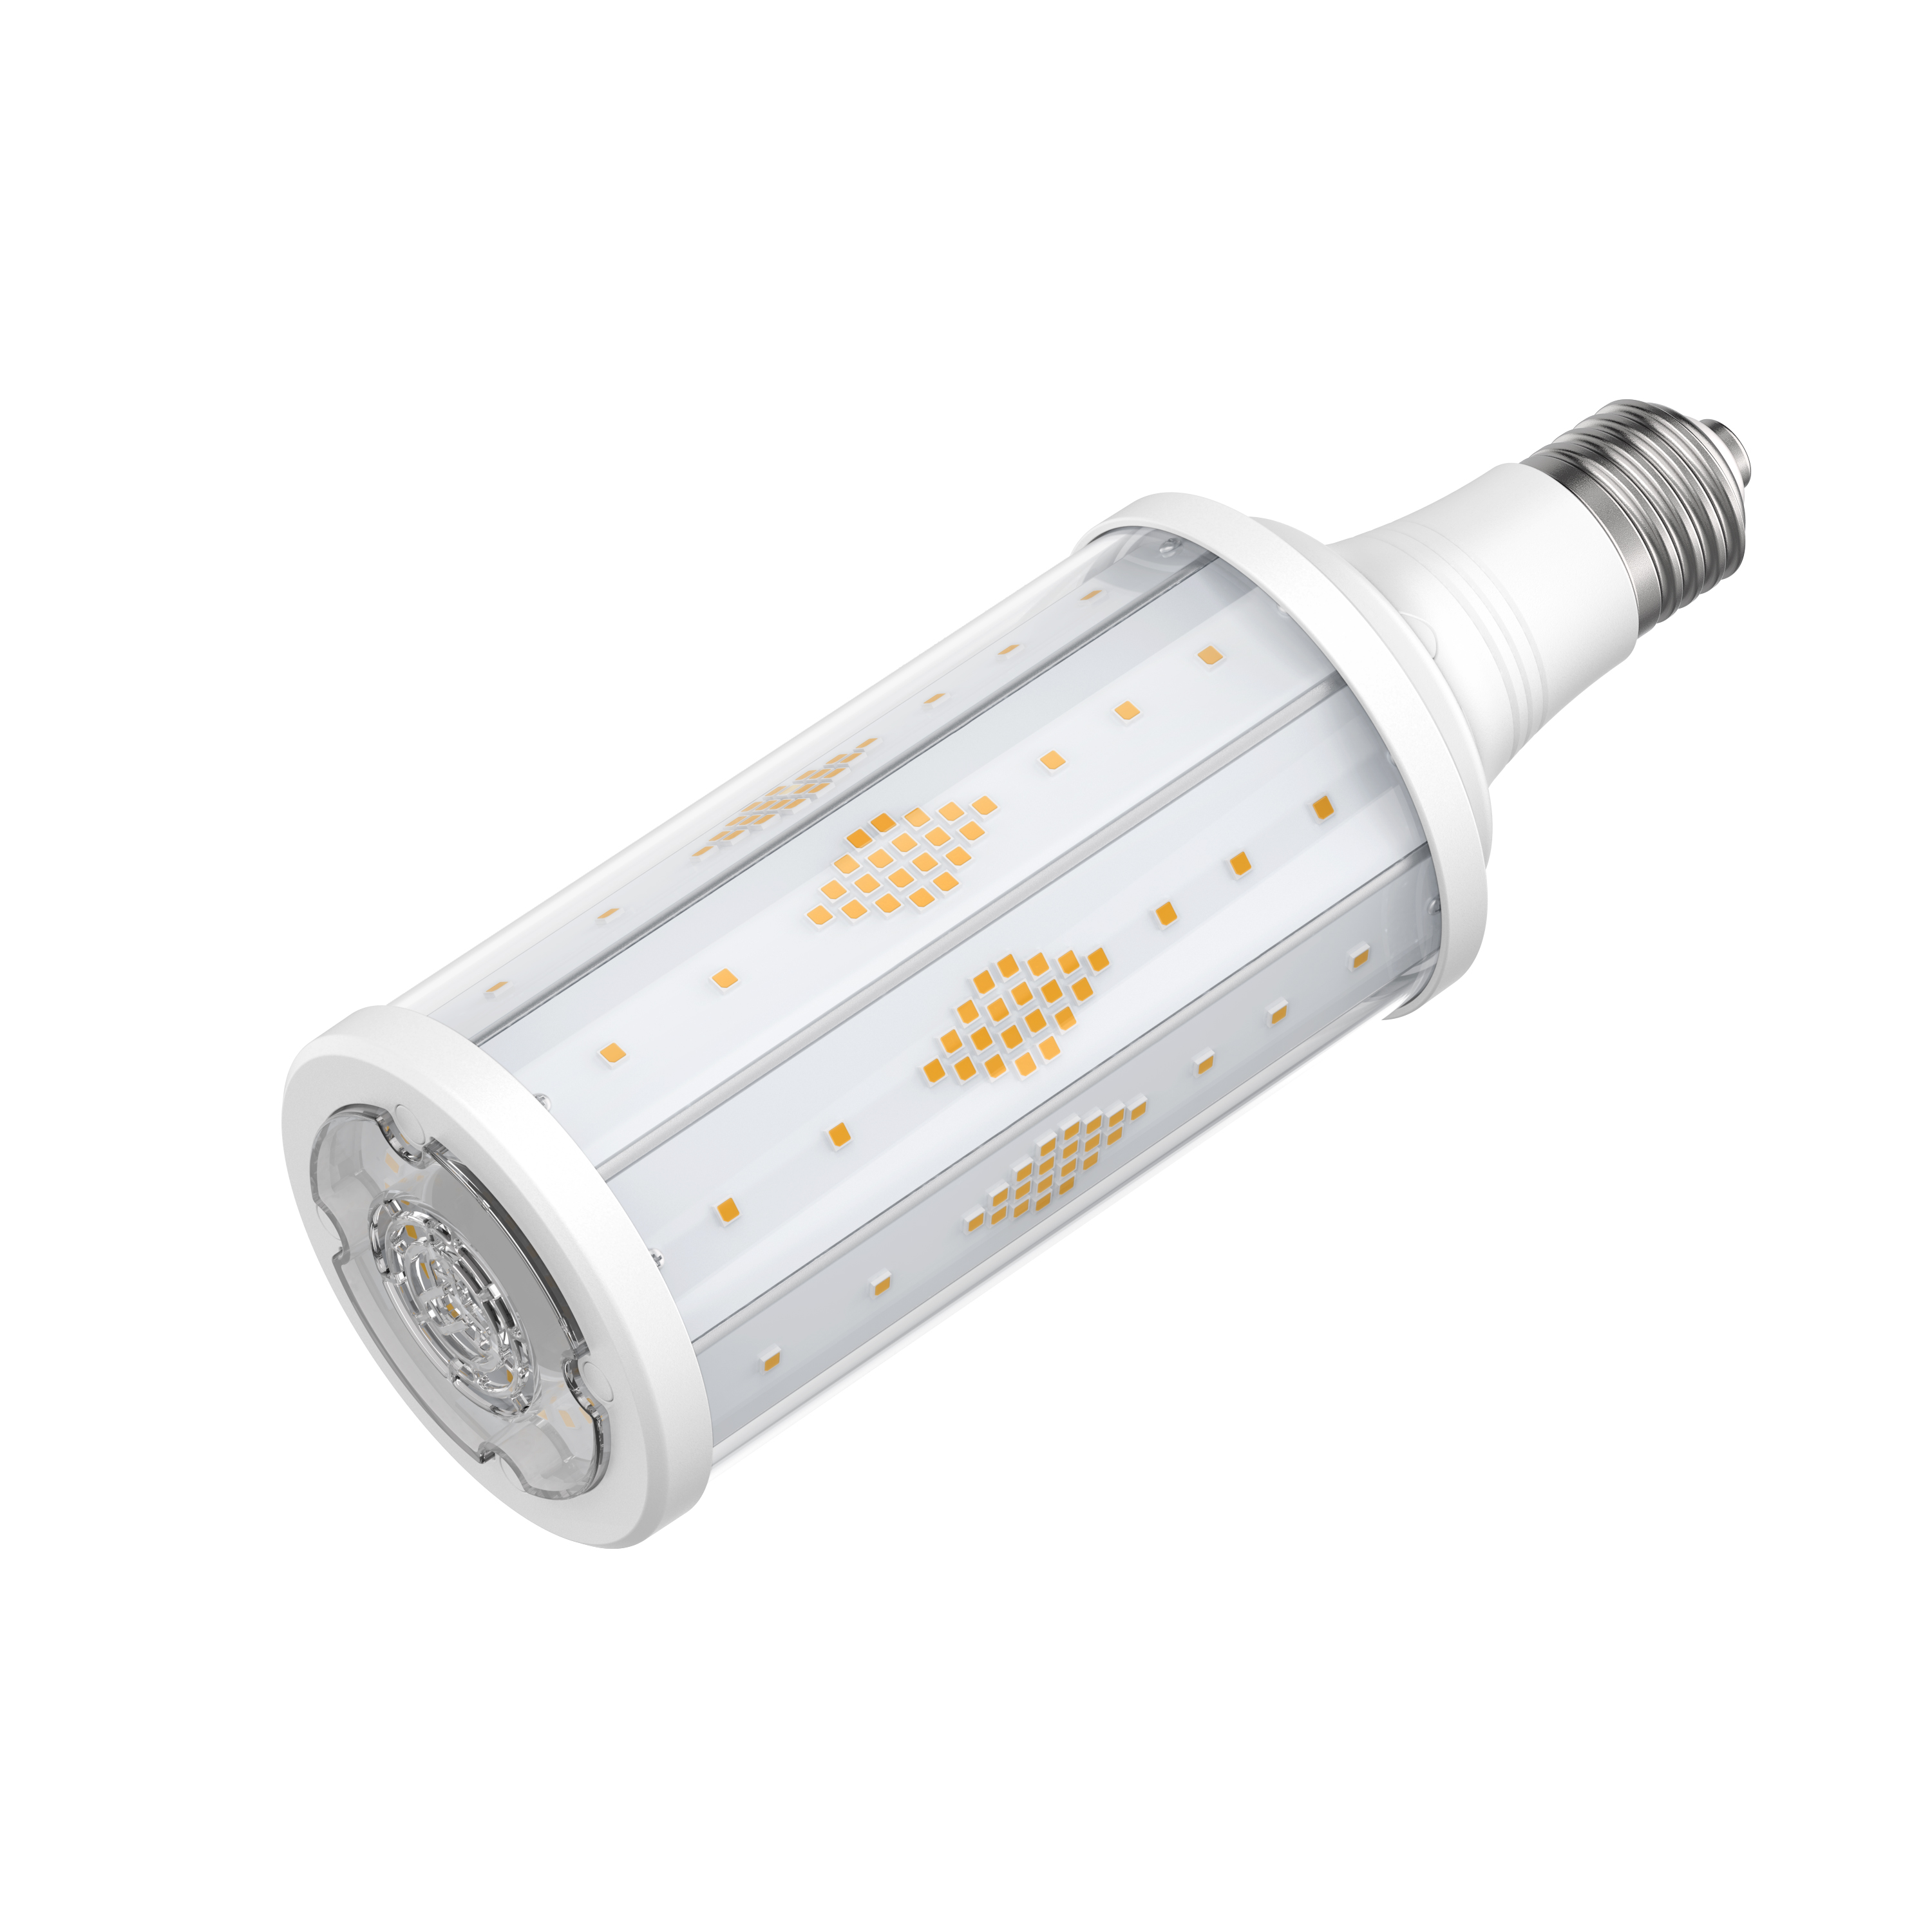 High Power 35W 50W 80W 160lm/w LED Corn Bulb E27 E40 Metal Halide Bulb LED HID Bulb for Street Light HPS Replacement - Buy Lumiere Eclairage Ligero LED Light Distributor, LED HID BULB, Luminoso Luses Luci LED Licht Leuchte Product on China?LED?Lighti